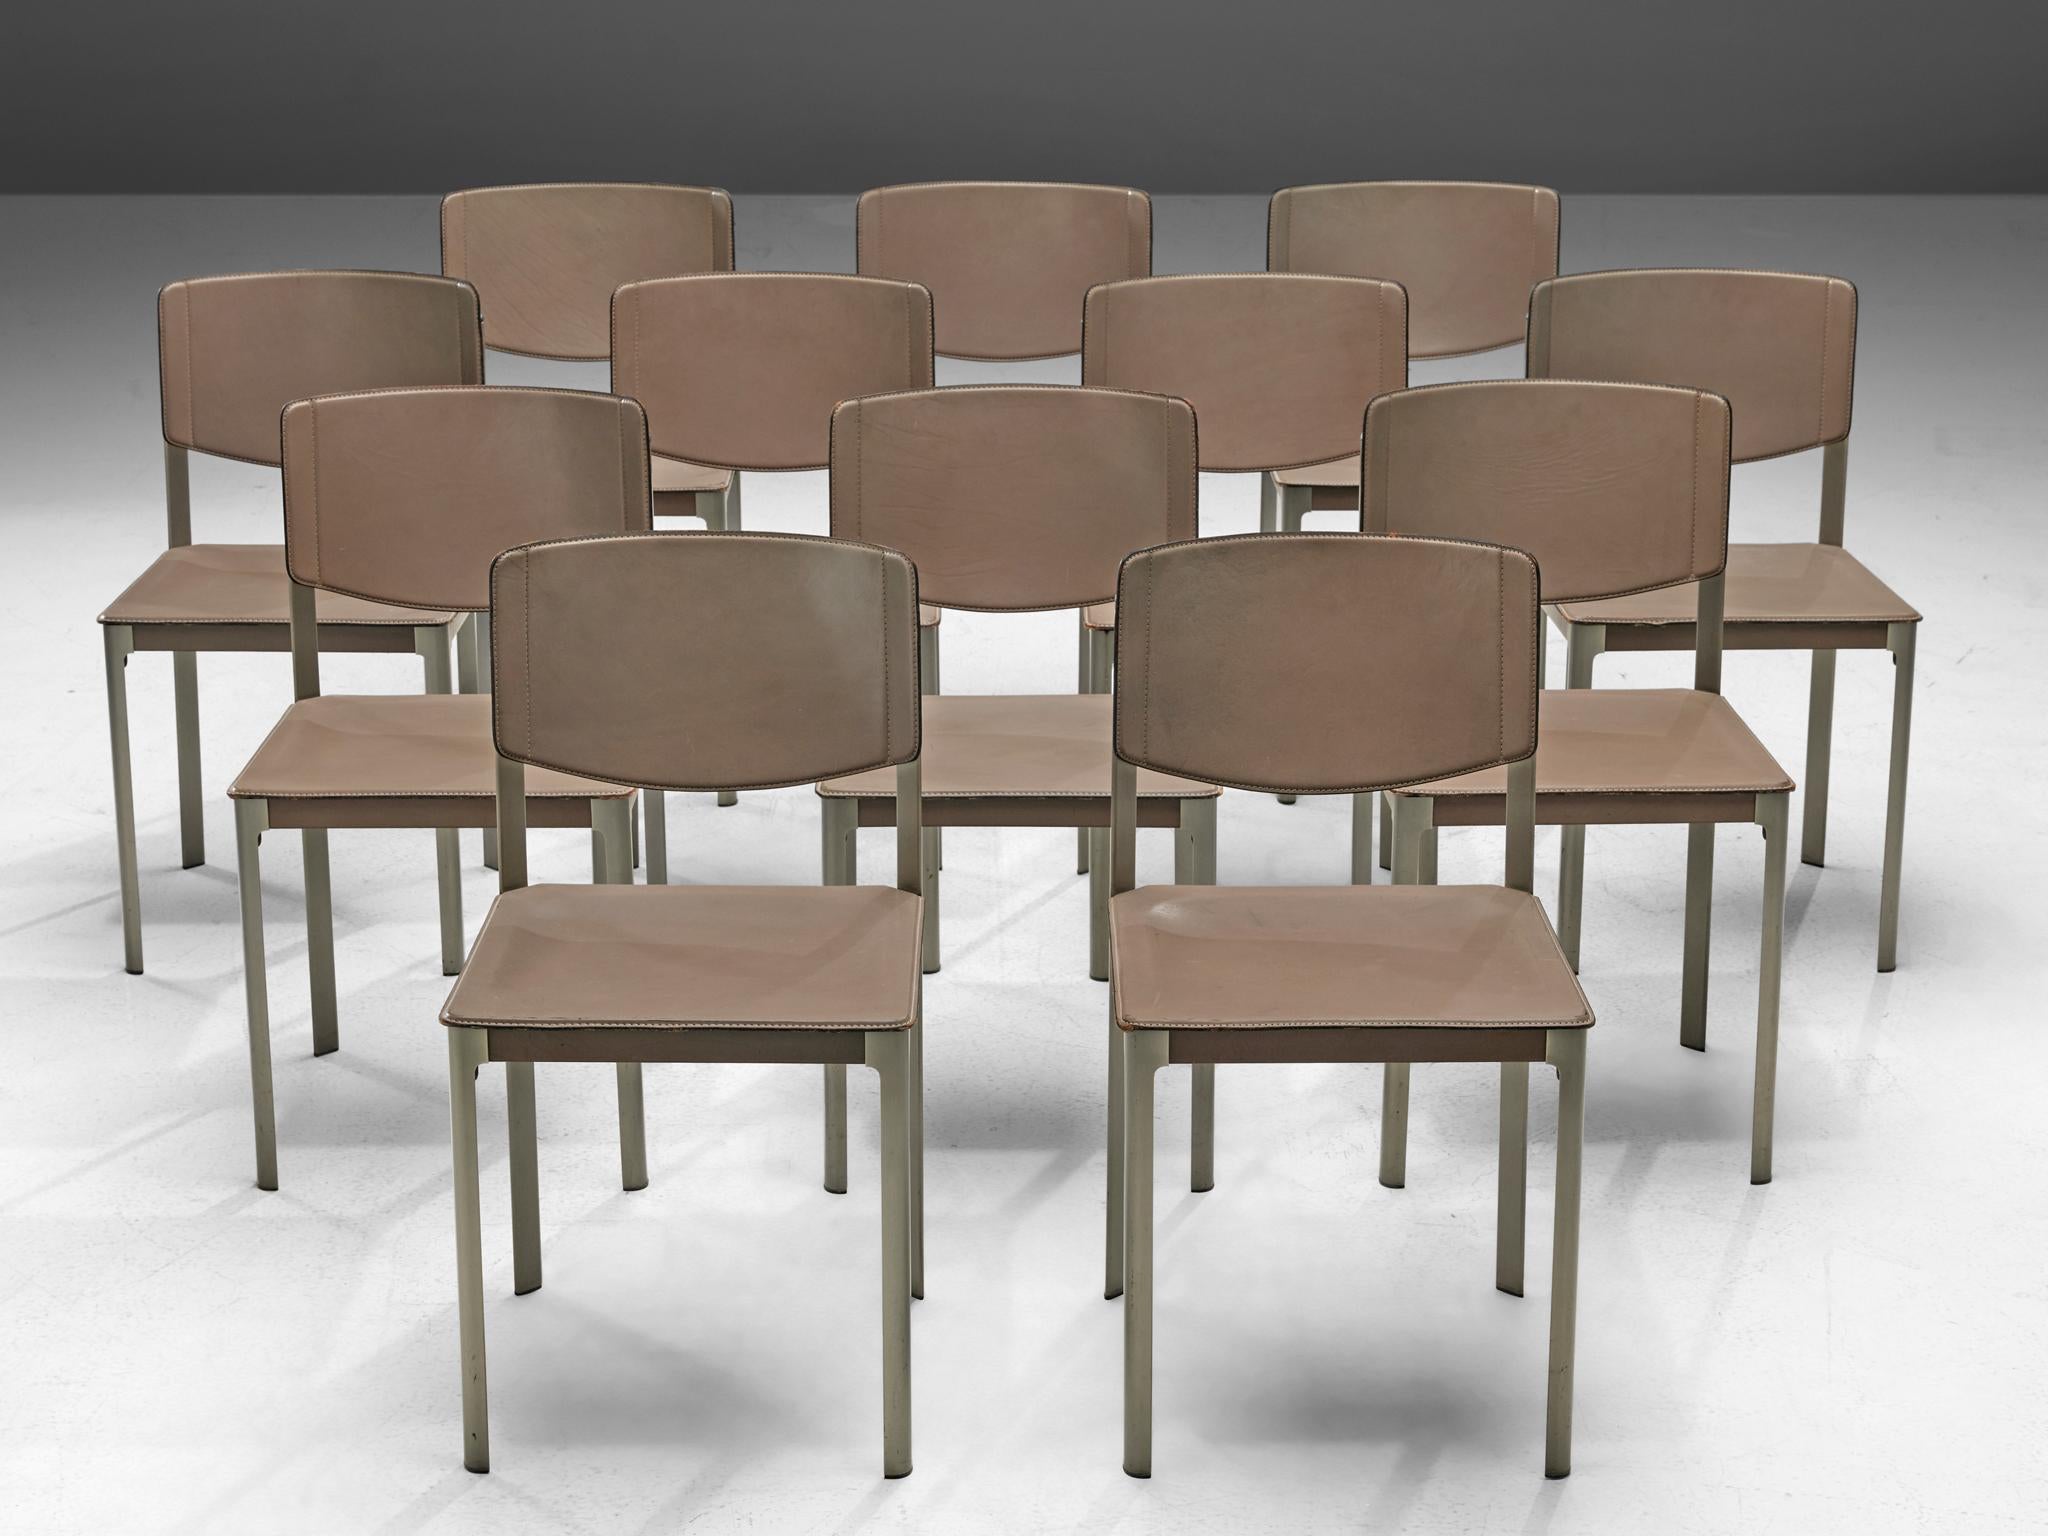 Post-Modern Matteo Grassi Set of Twelve Dining Chairs in Leather and Steel